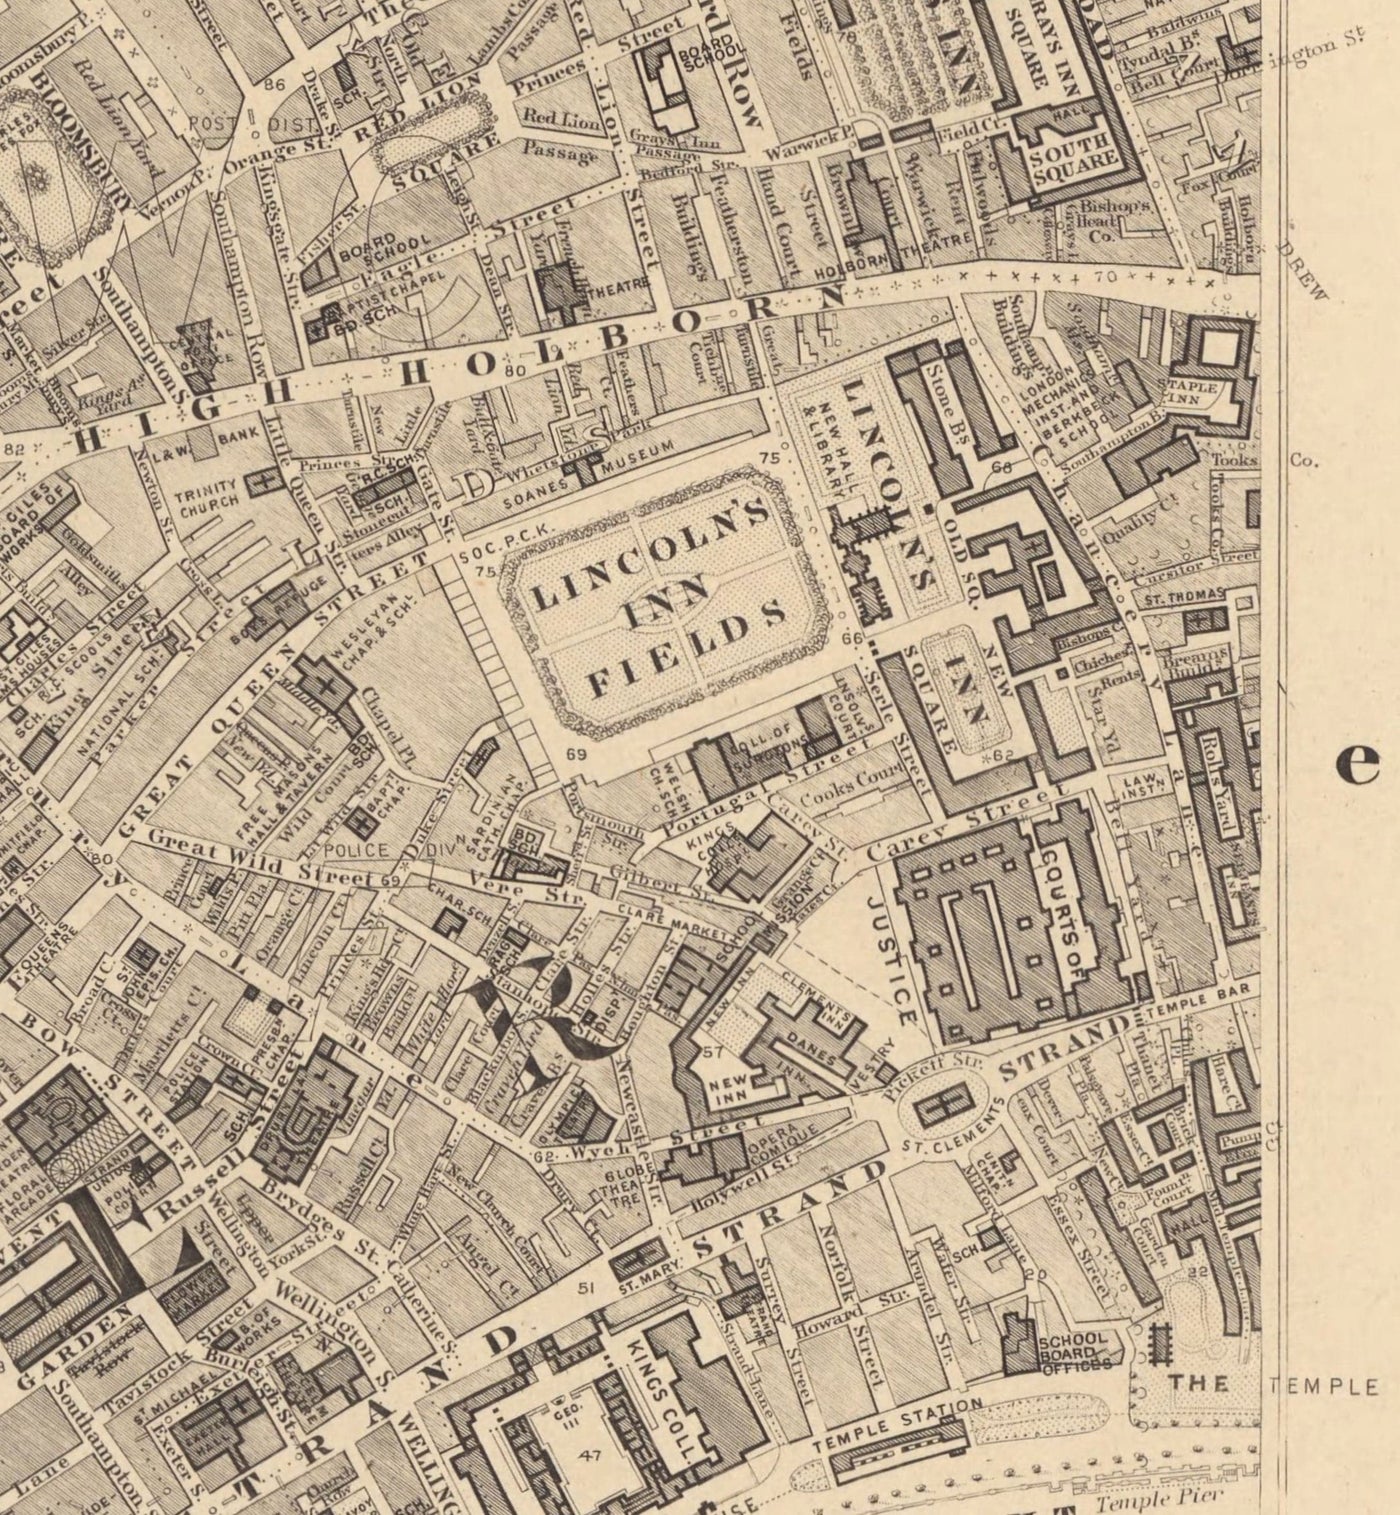 Old Map of Central London by Edward Stanford, 1862 - Mayfair, Oxford Street, Westminster, Knightsbridge, Waterloo - W1, WC1, WC2, SW1, W2